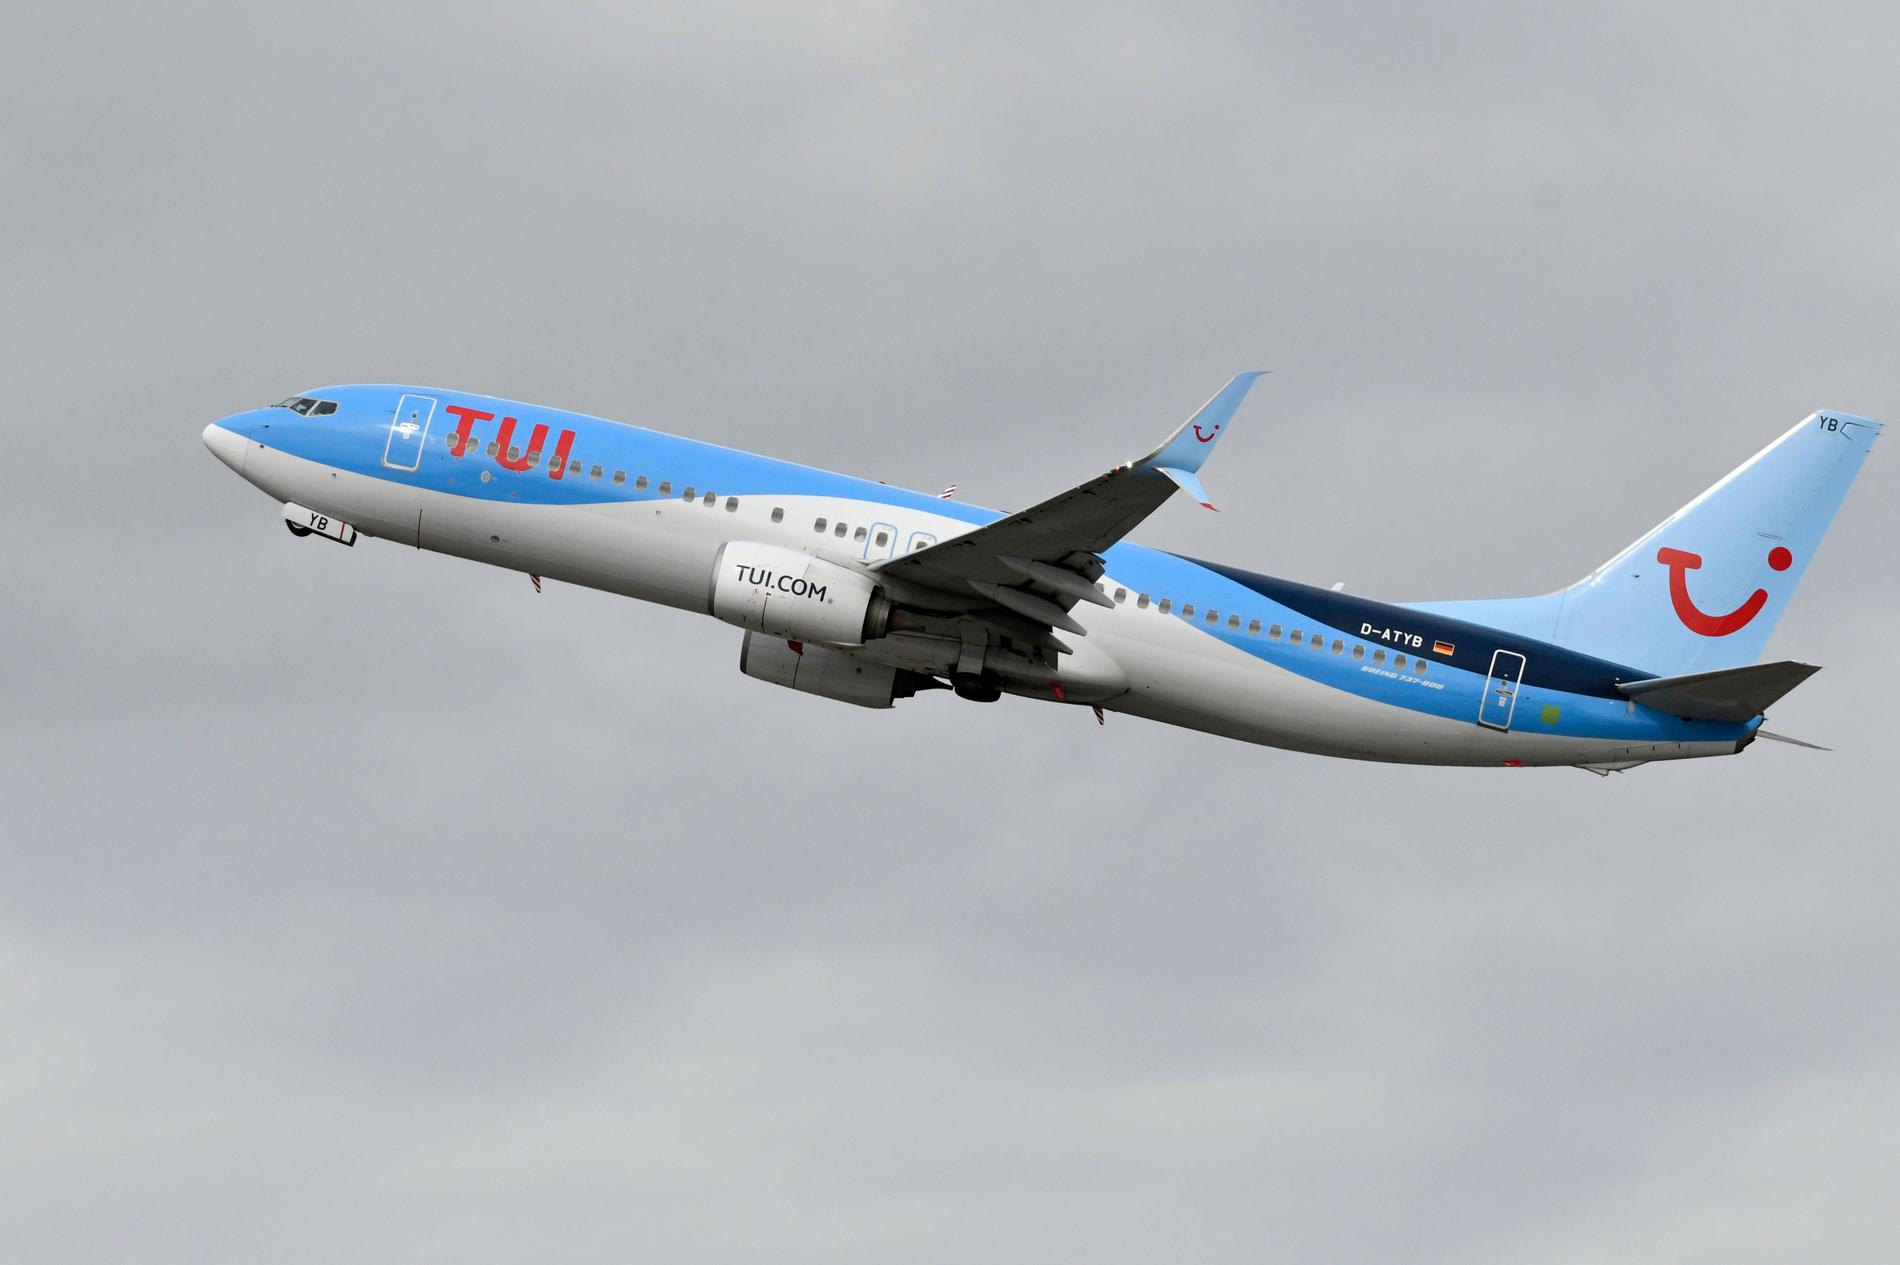 Tui Norge with $1 billion in sales and passenger growth